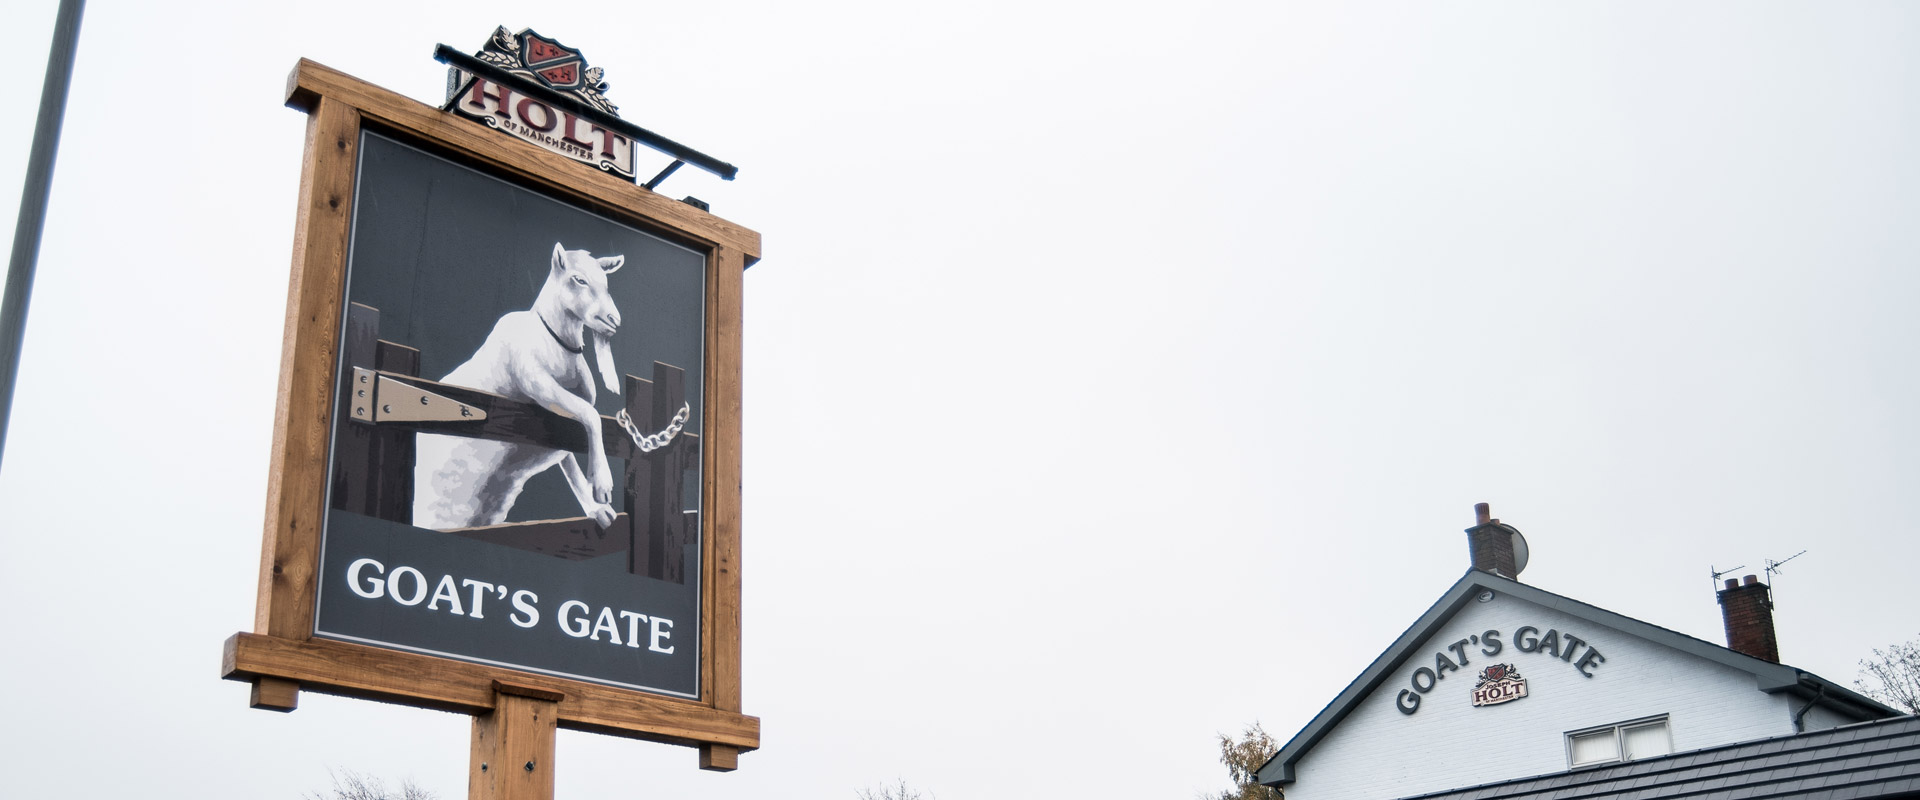 goats gate pub sign logo in whitefield bury south